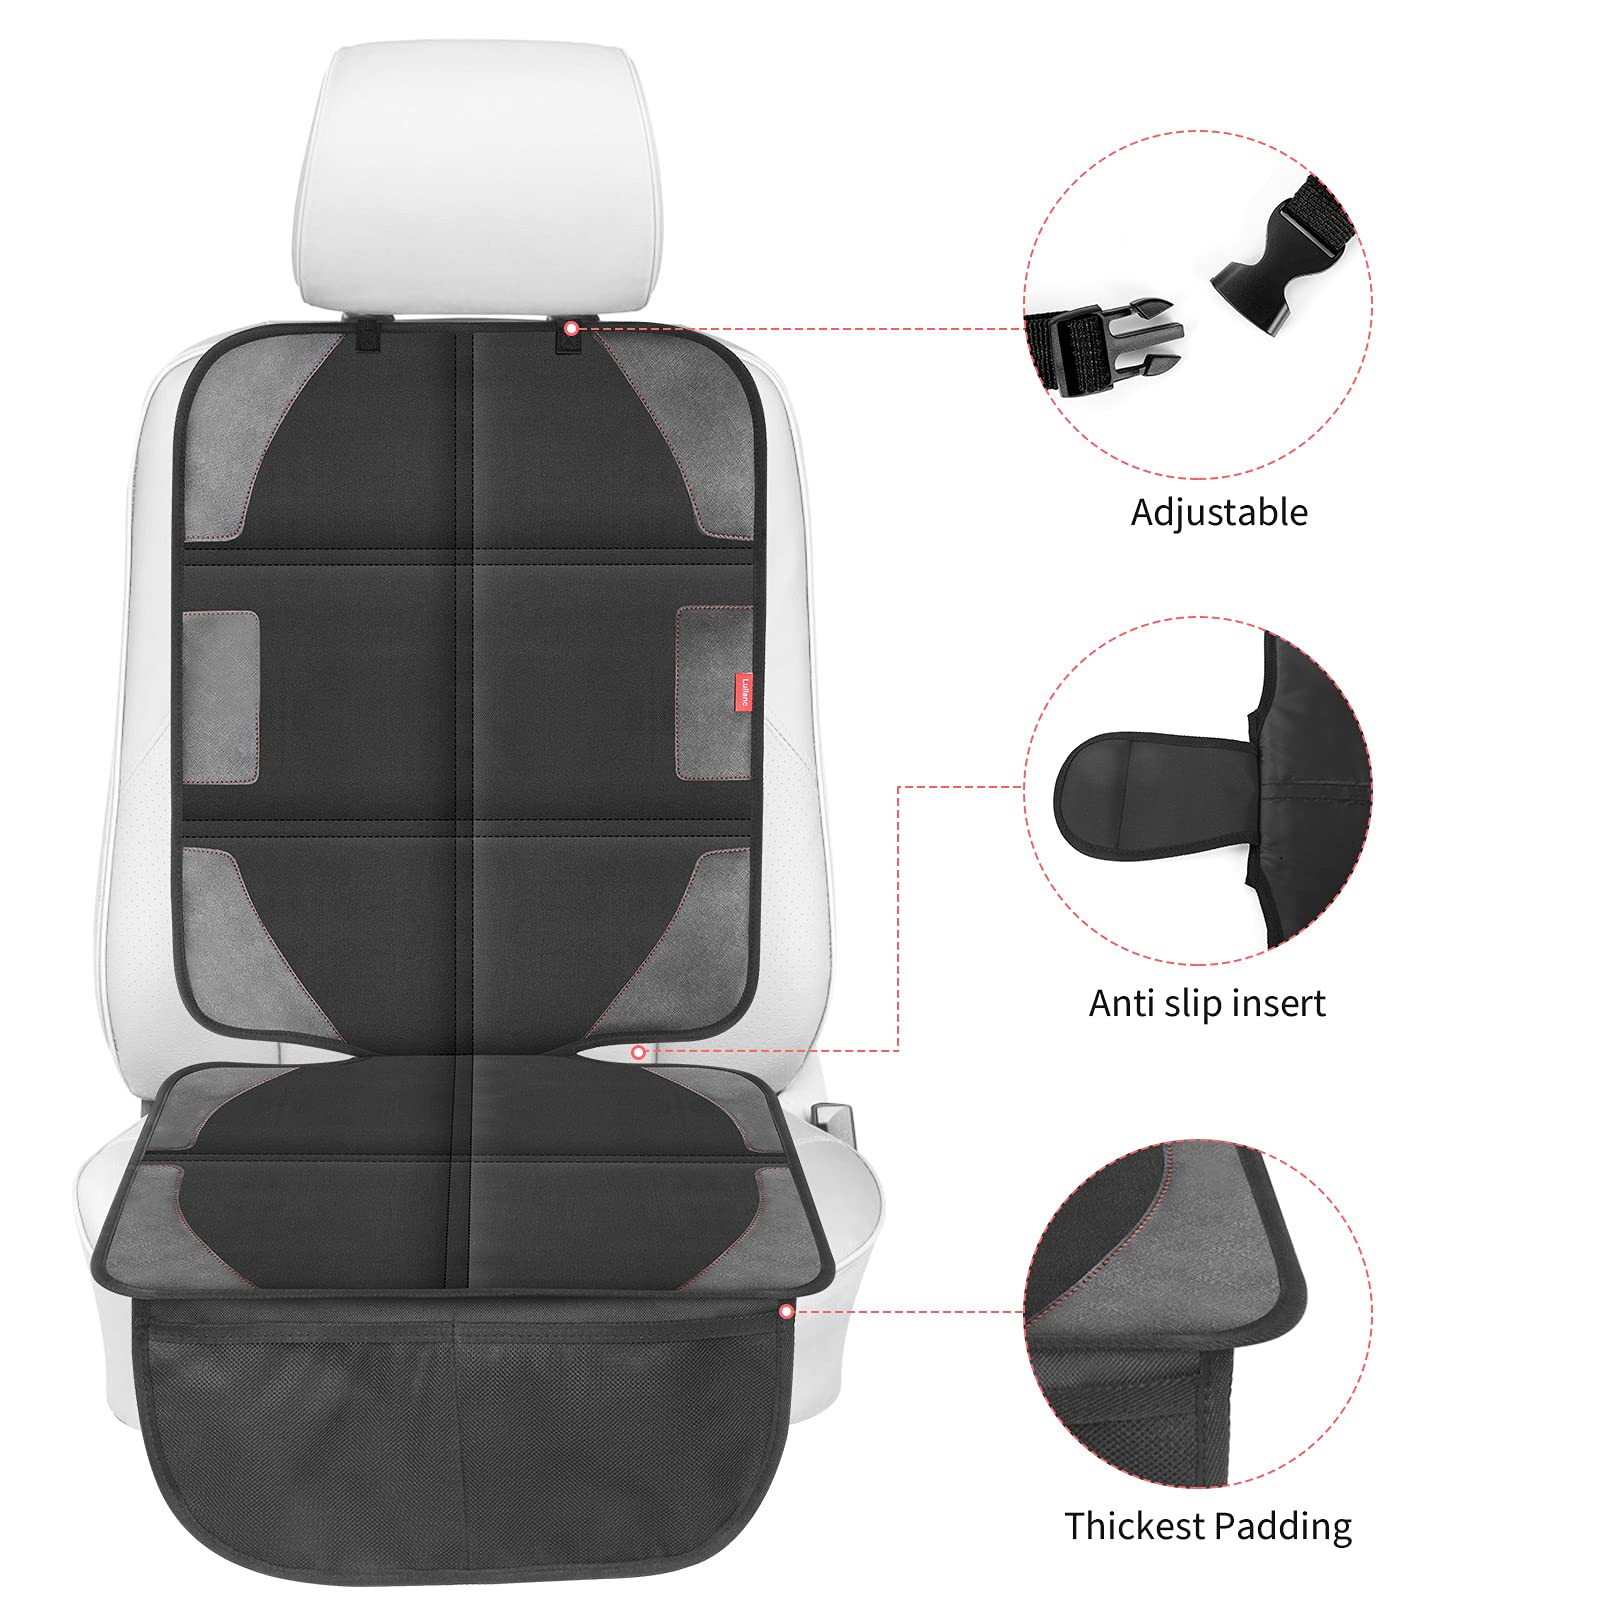 LUILANC Car Seat Protector with Thickest Padding,Waterproof 600D with Storage Pockets,Non-Slip Pets Fabric Child Baby Cover Leather Reinforced Vehicle Seat 1 Pack (Black)